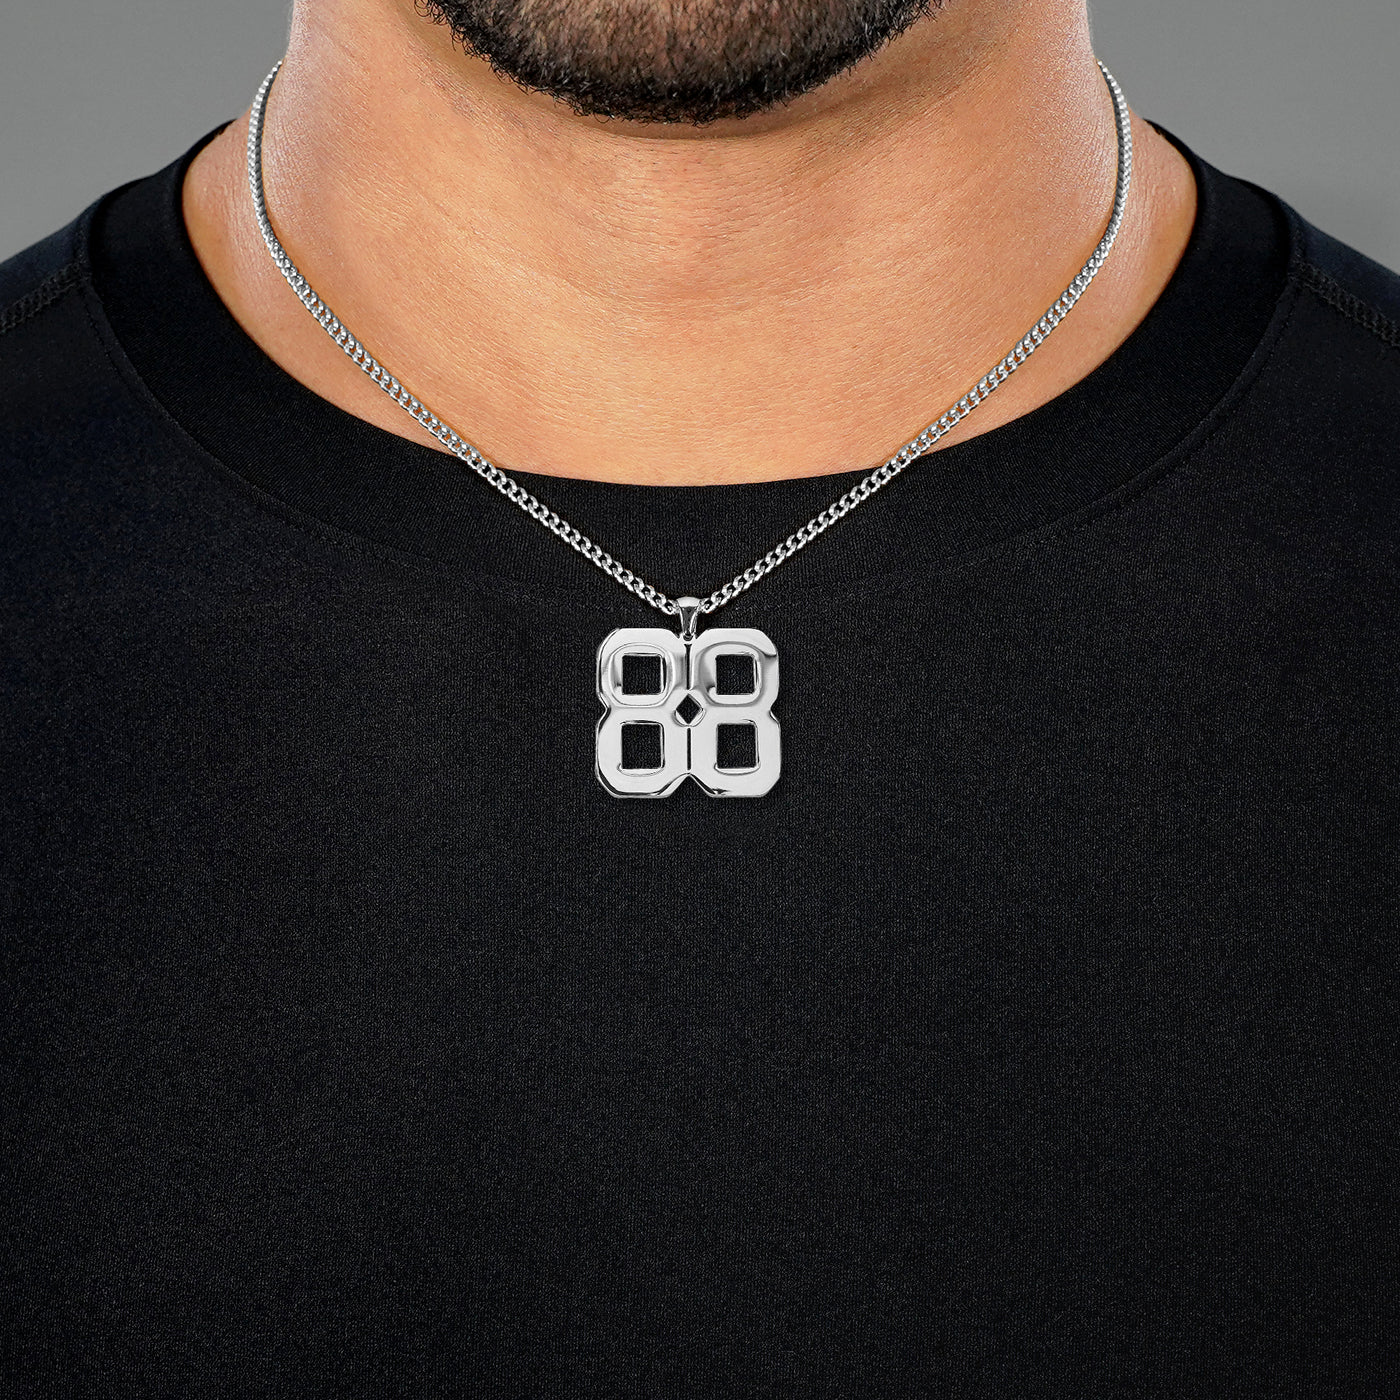 88 Number Pendant with Chain Necklace - Stainless Steel